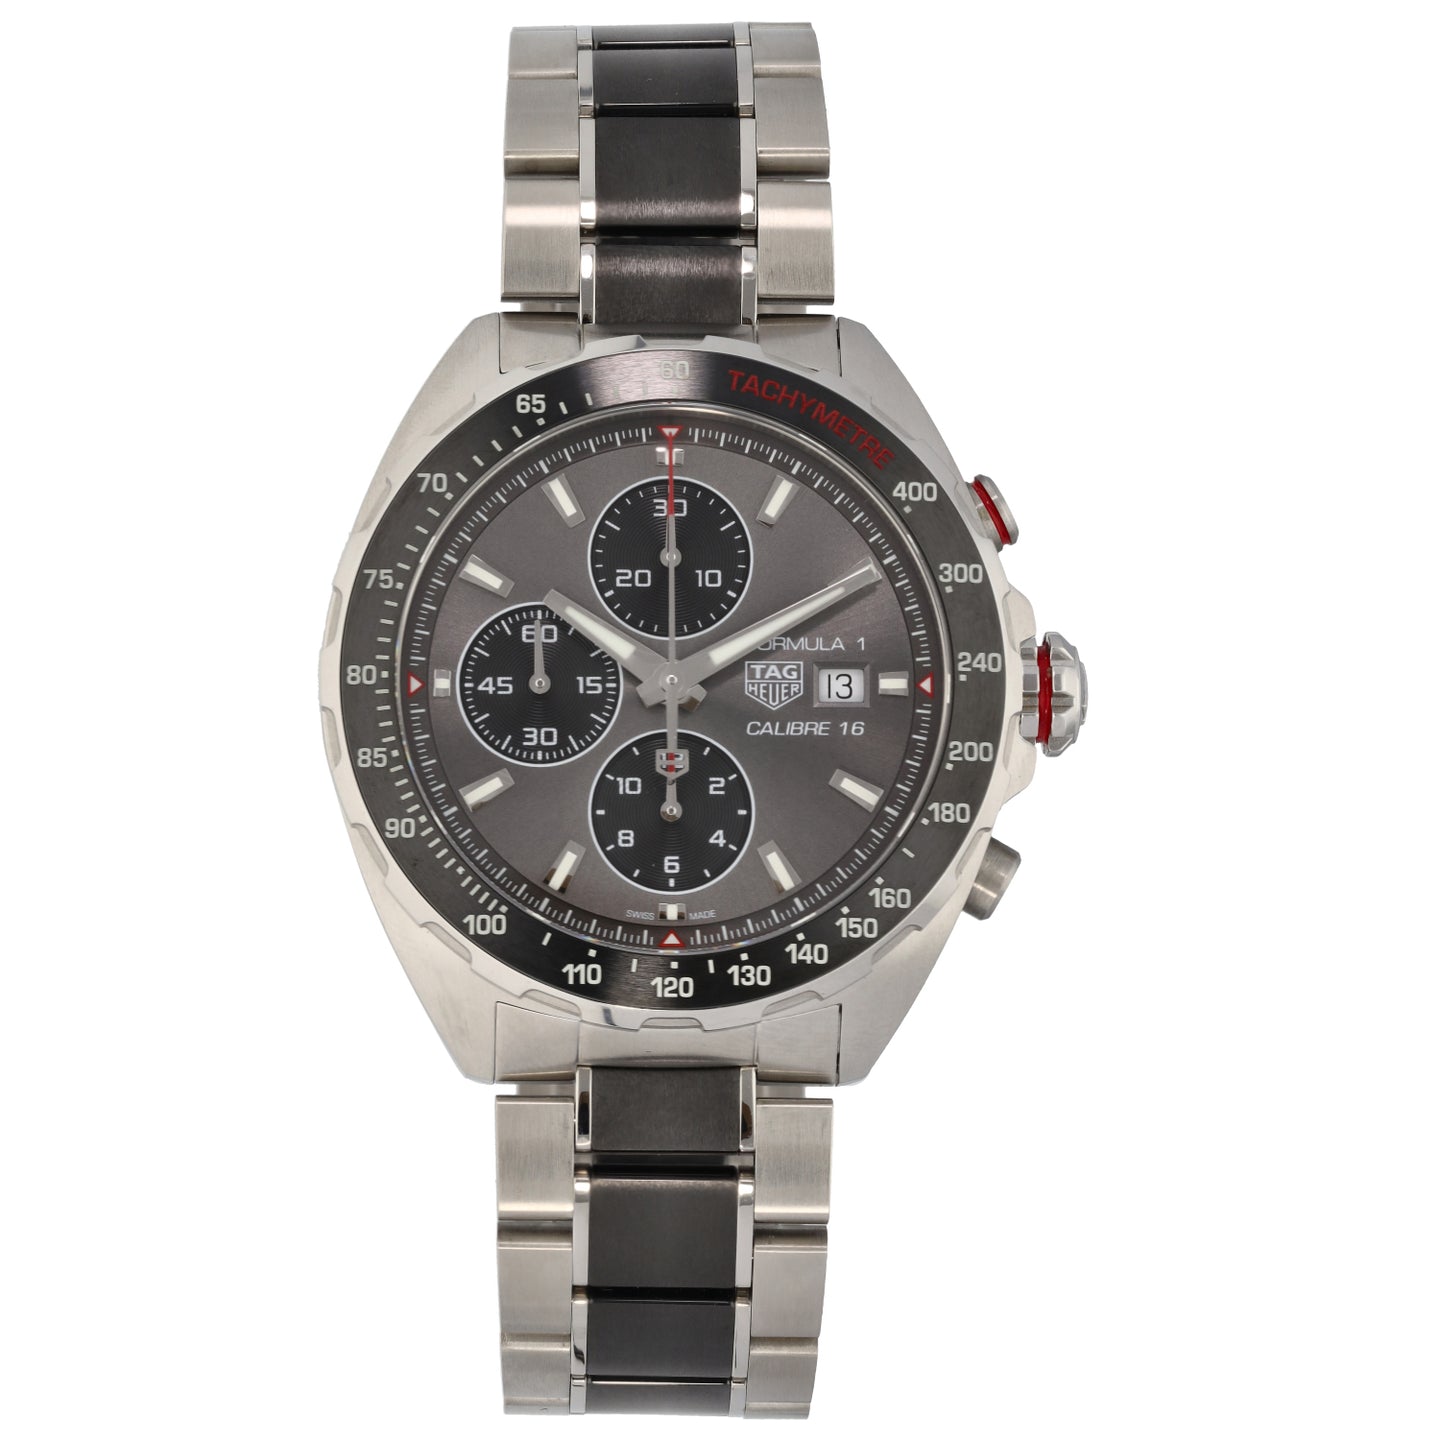 Tag Heuer Formula 1 CAZ2012-0 44mm Stainless Steel Watch